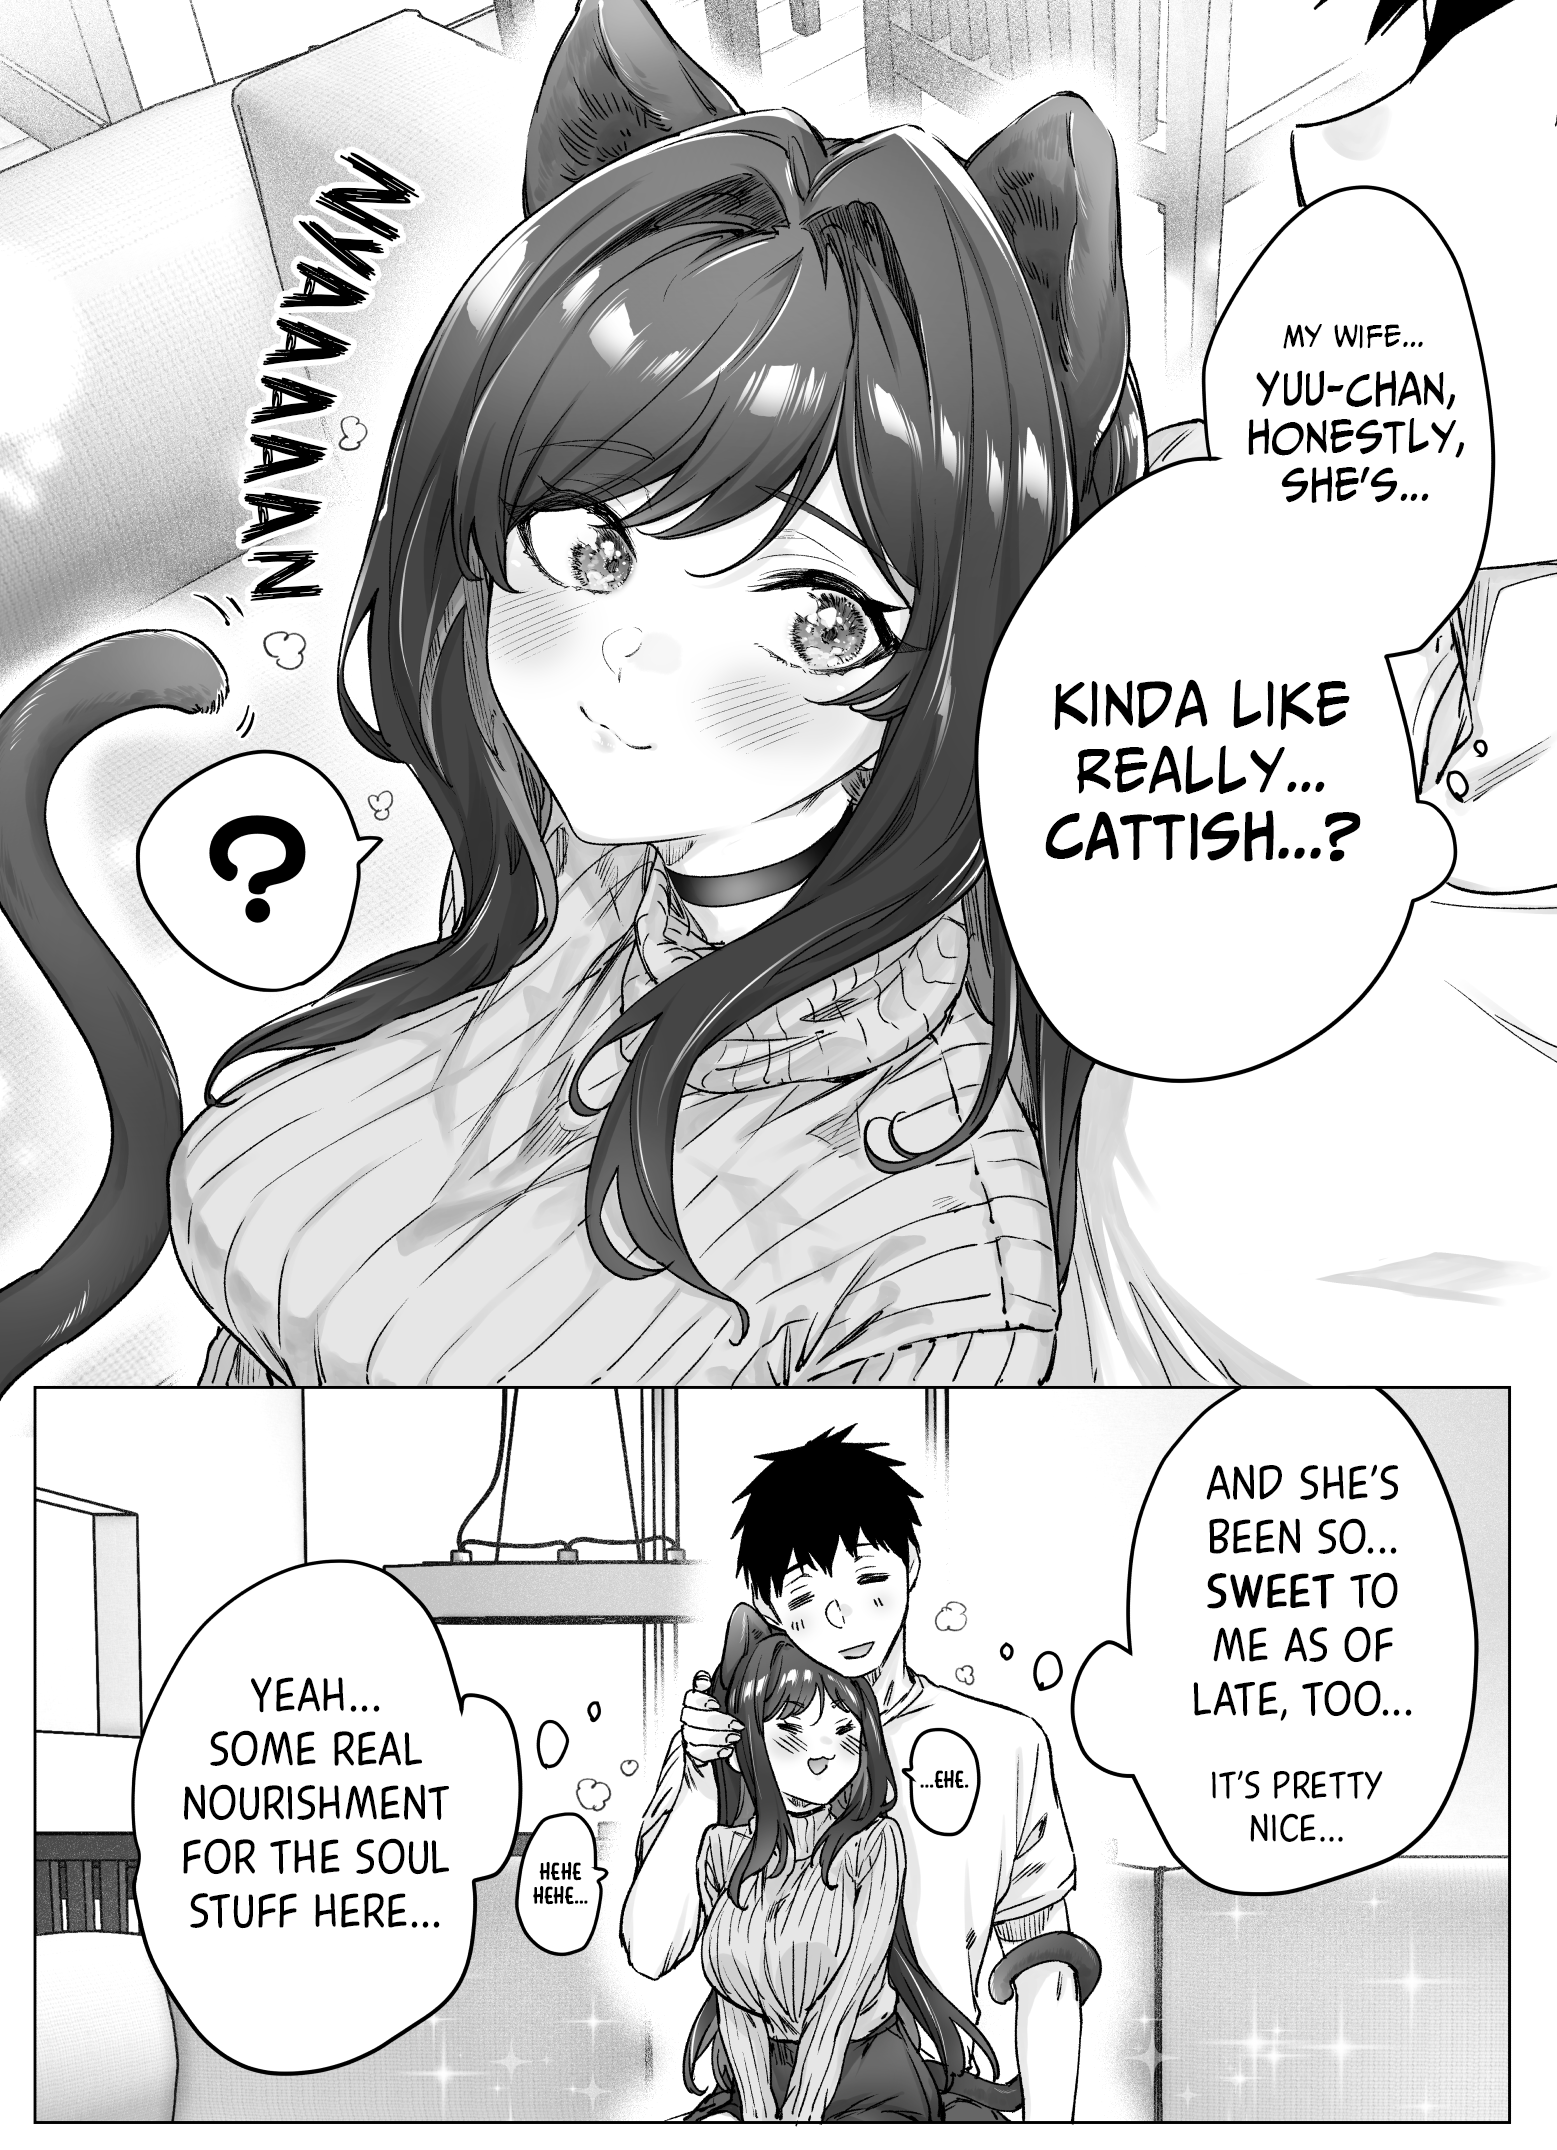 The Tsuntsuntsuntsuntsuntsun Tsuntsuntsuntsuntsundere Girl Getting Less And Less Tsun Day By Day Chapter 69.5